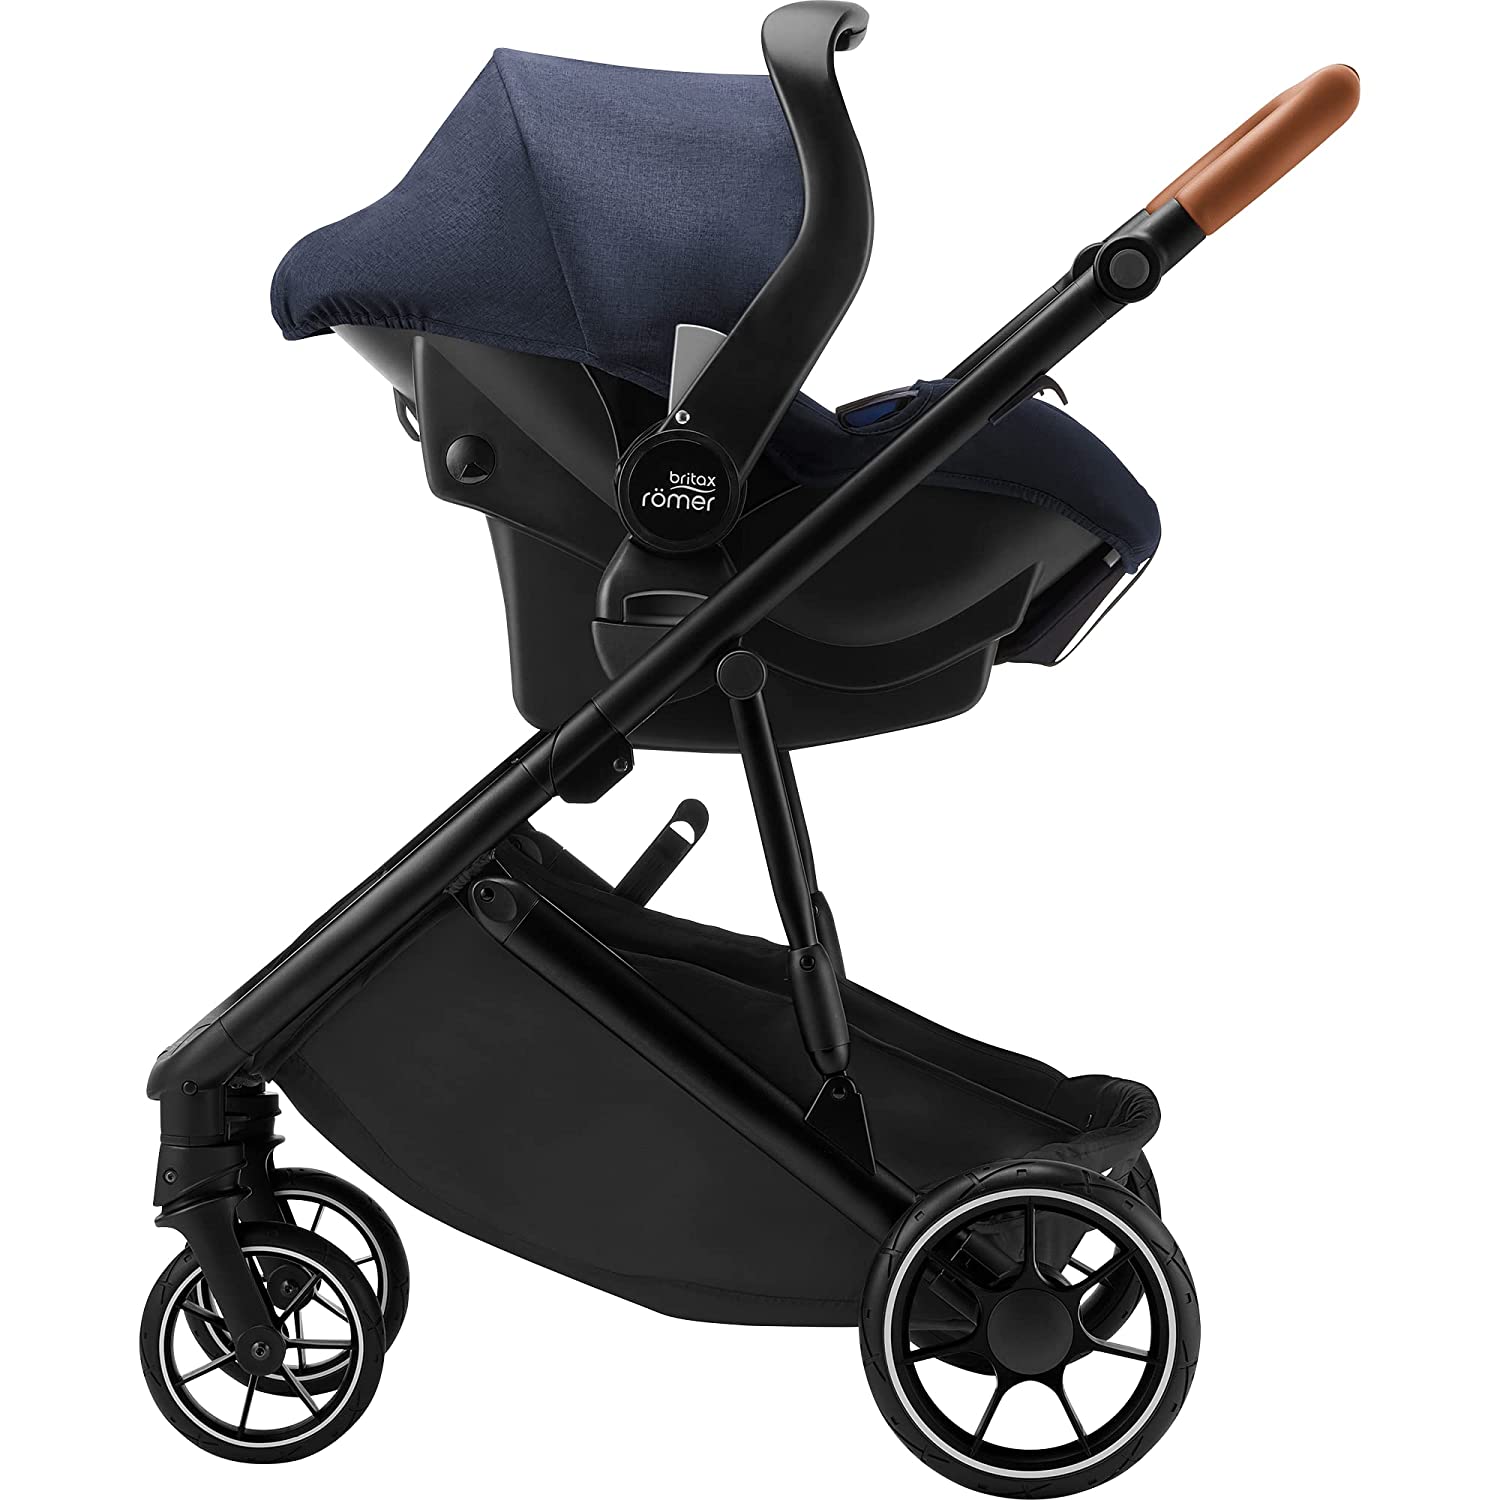 Britax Romer Primo Baby Seat Compatible with Primo Base, from Birth to 12/15 Months (13 kg) Group 0+, Navy Ink